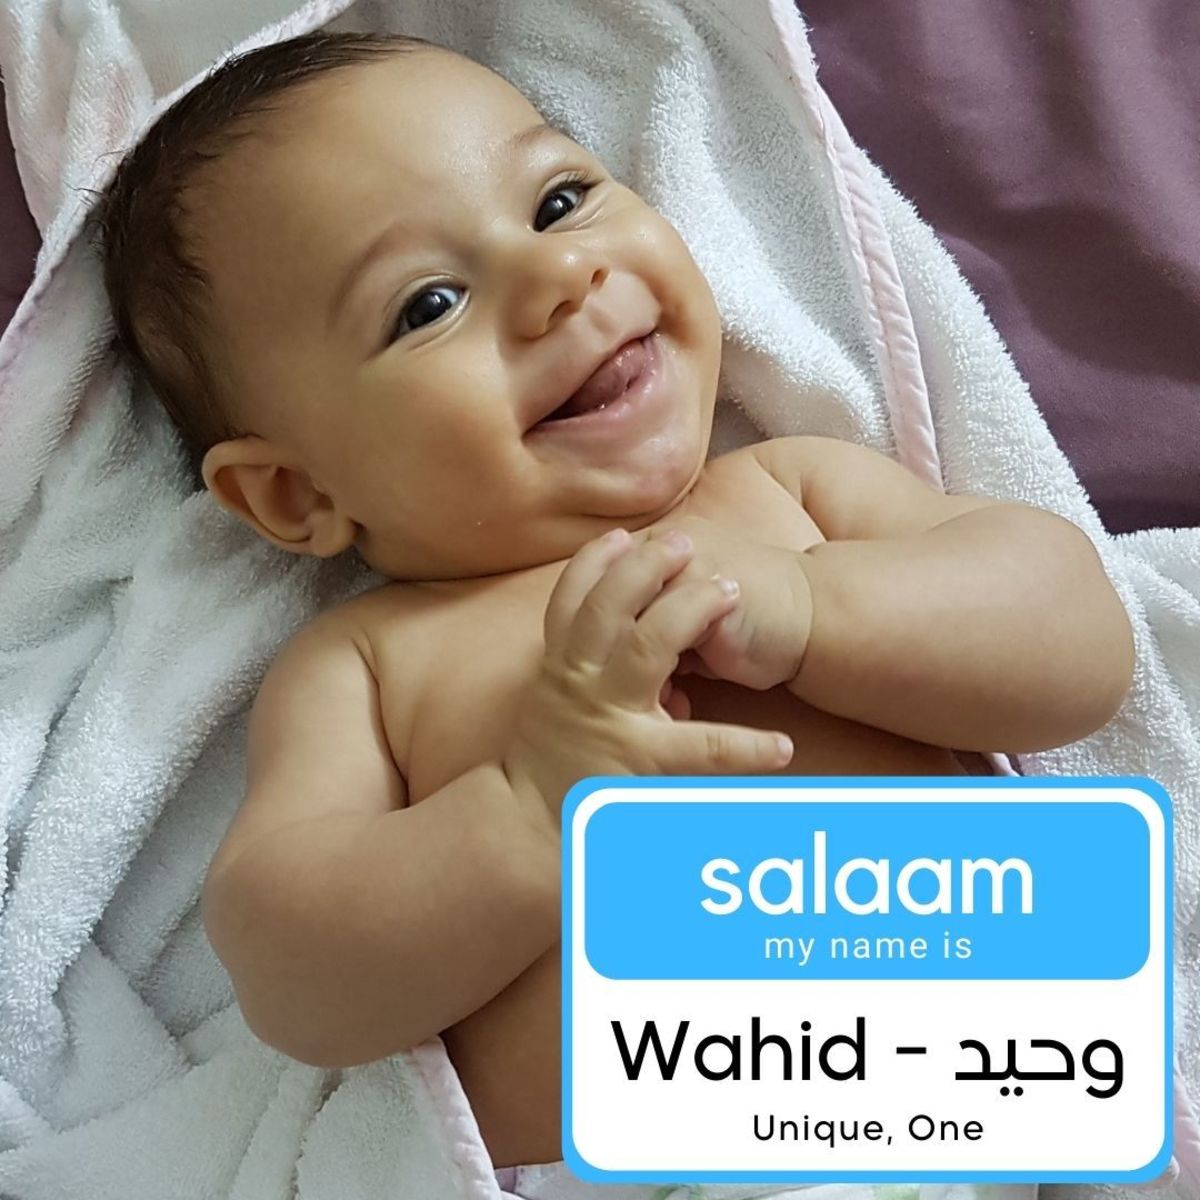 Wahid is a beautiful direct Qur'anic name that means "unique."